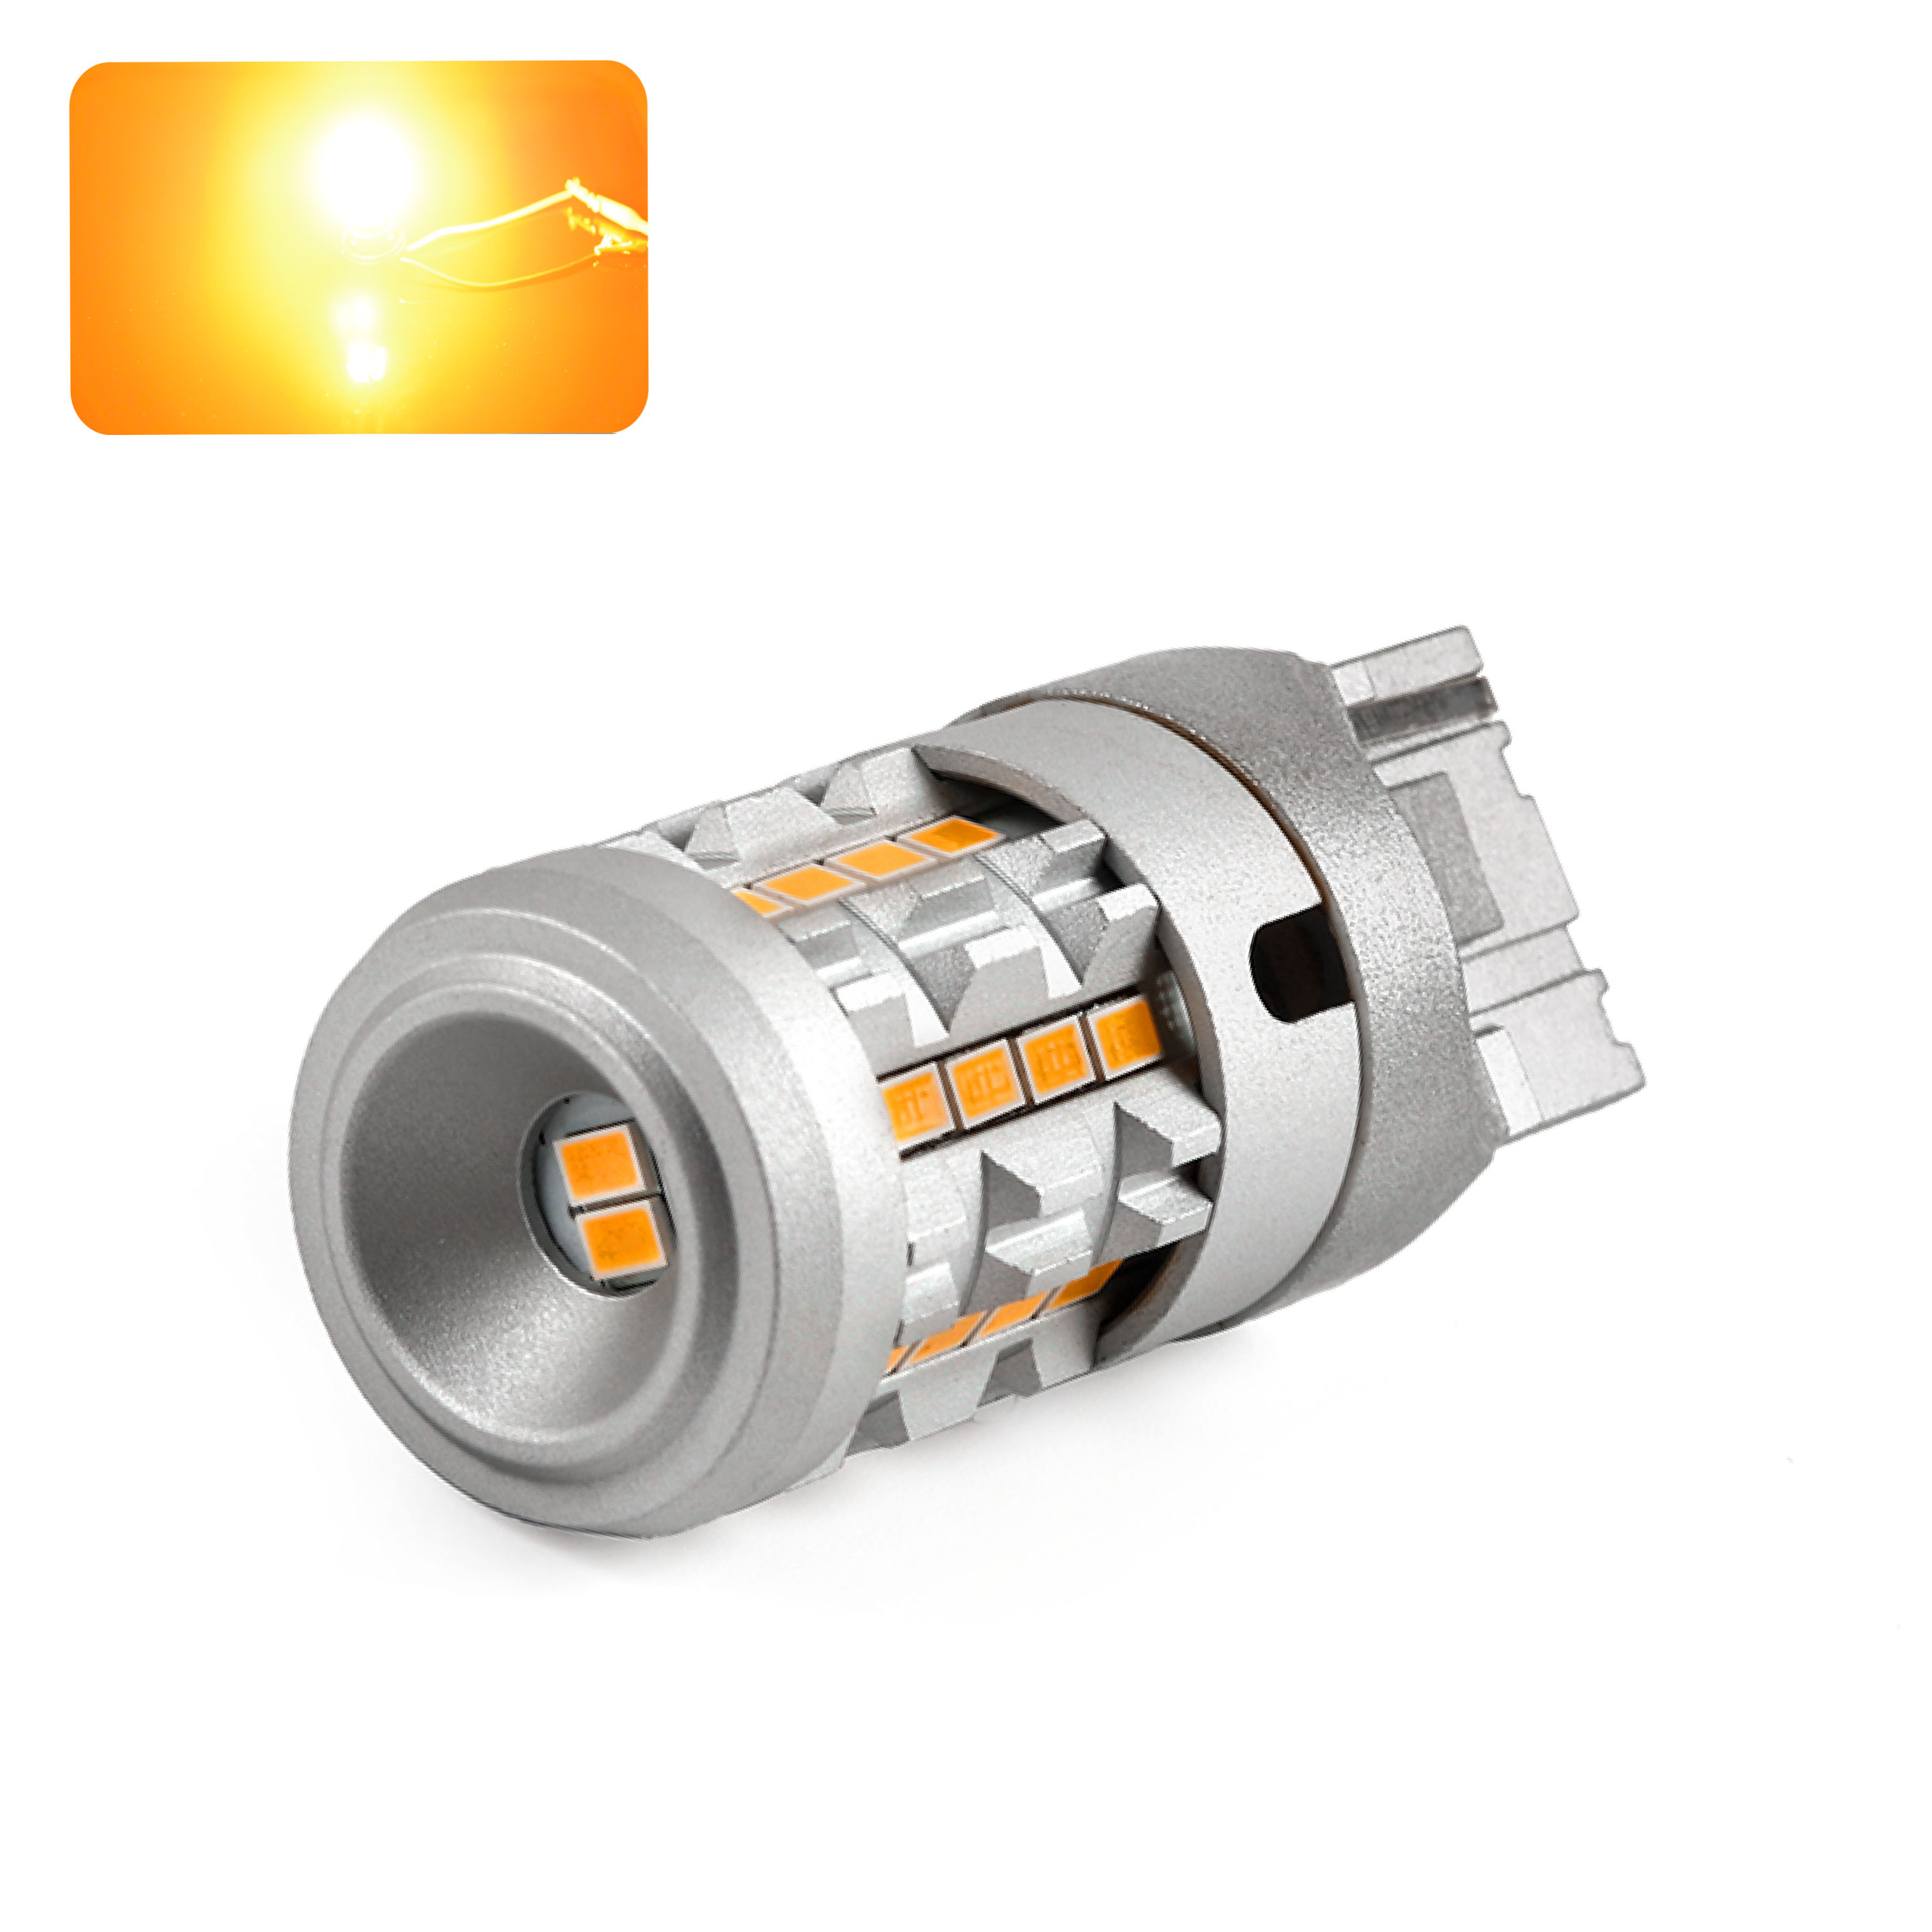 Ampoule LED T20-WY21W-ULTRA CLIGNOTANT